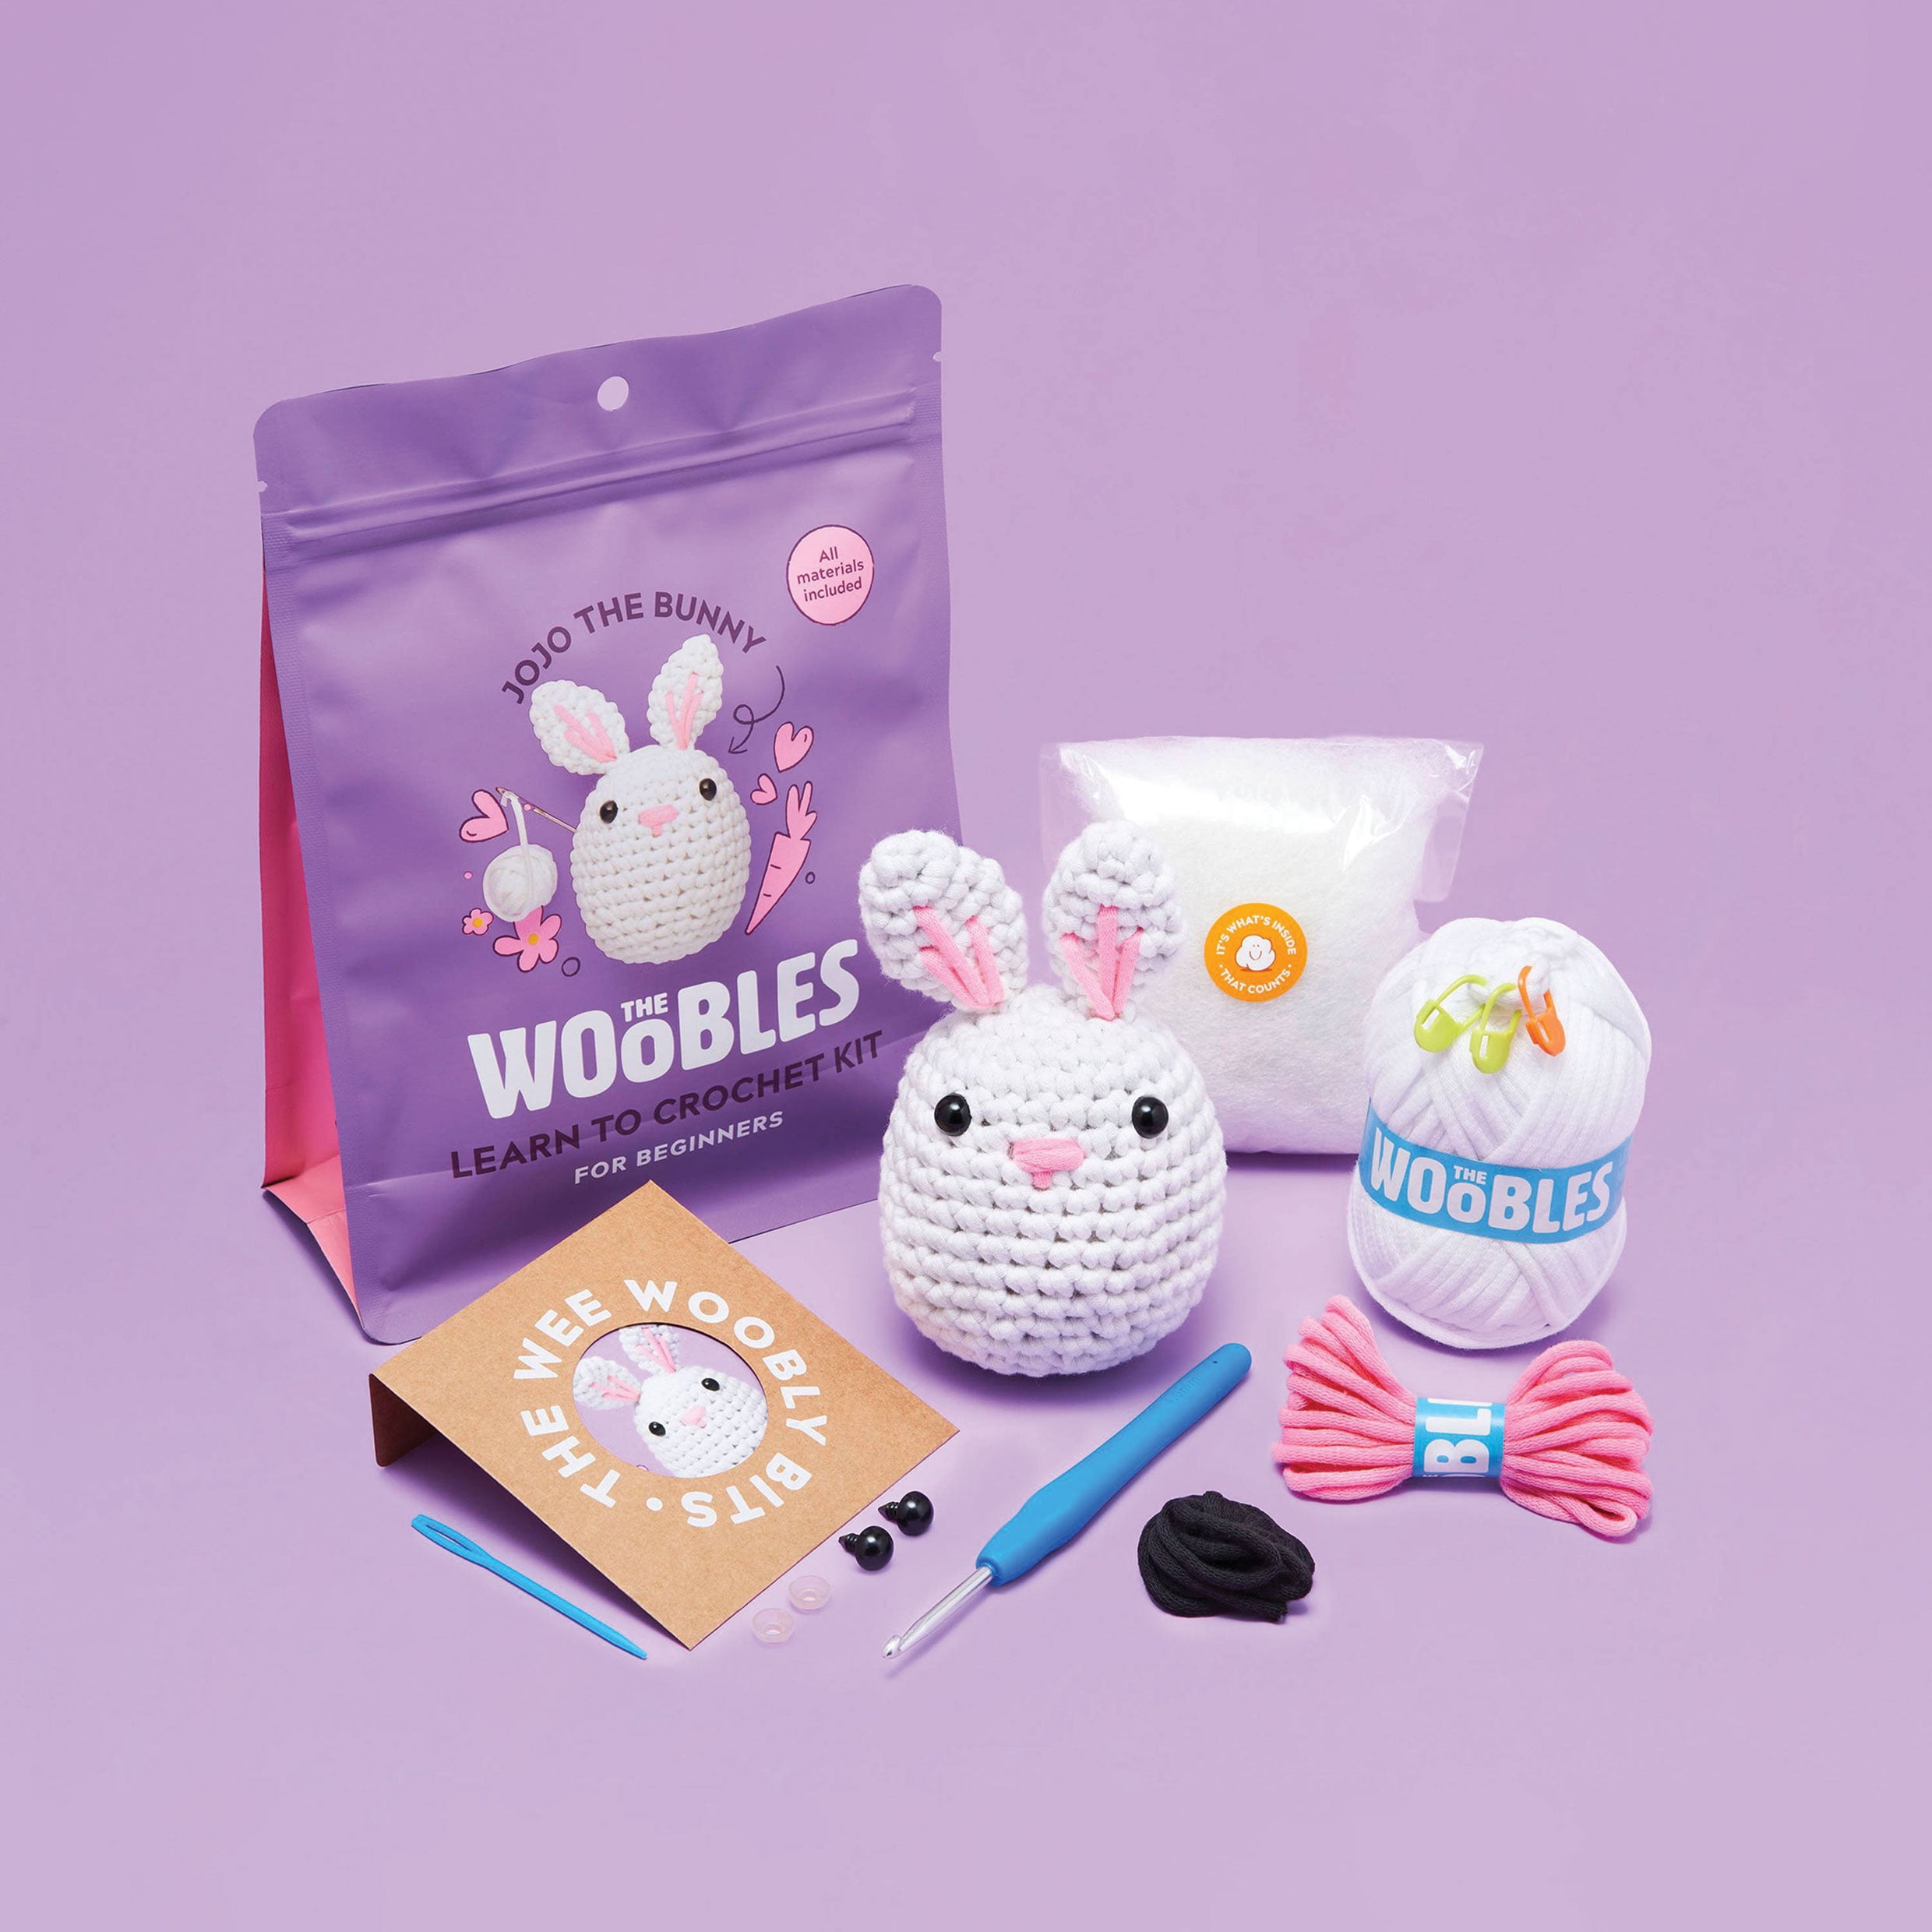 The Woobles Beginners Crochet Kit with Easy Peasy Yarn as seen on